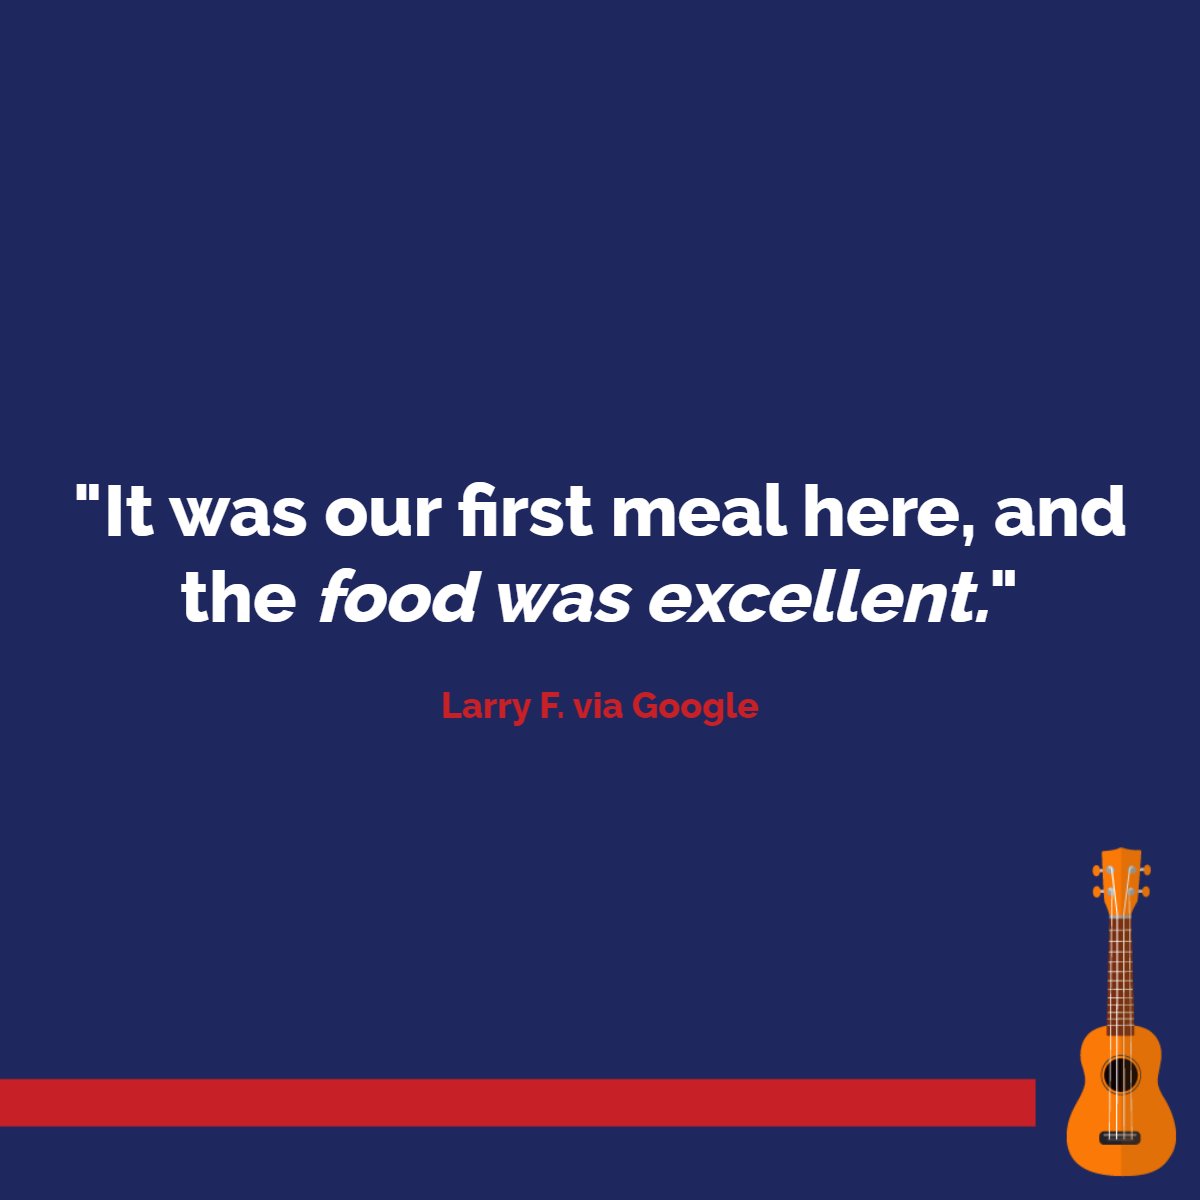 Plentiful menu options, flavorful Mexican bites, and a guaranteed “I'm full” satisfaction are our specialties. #LunaYSolMexicanRestaurant #MexicanCuisine #MoorestownNJ